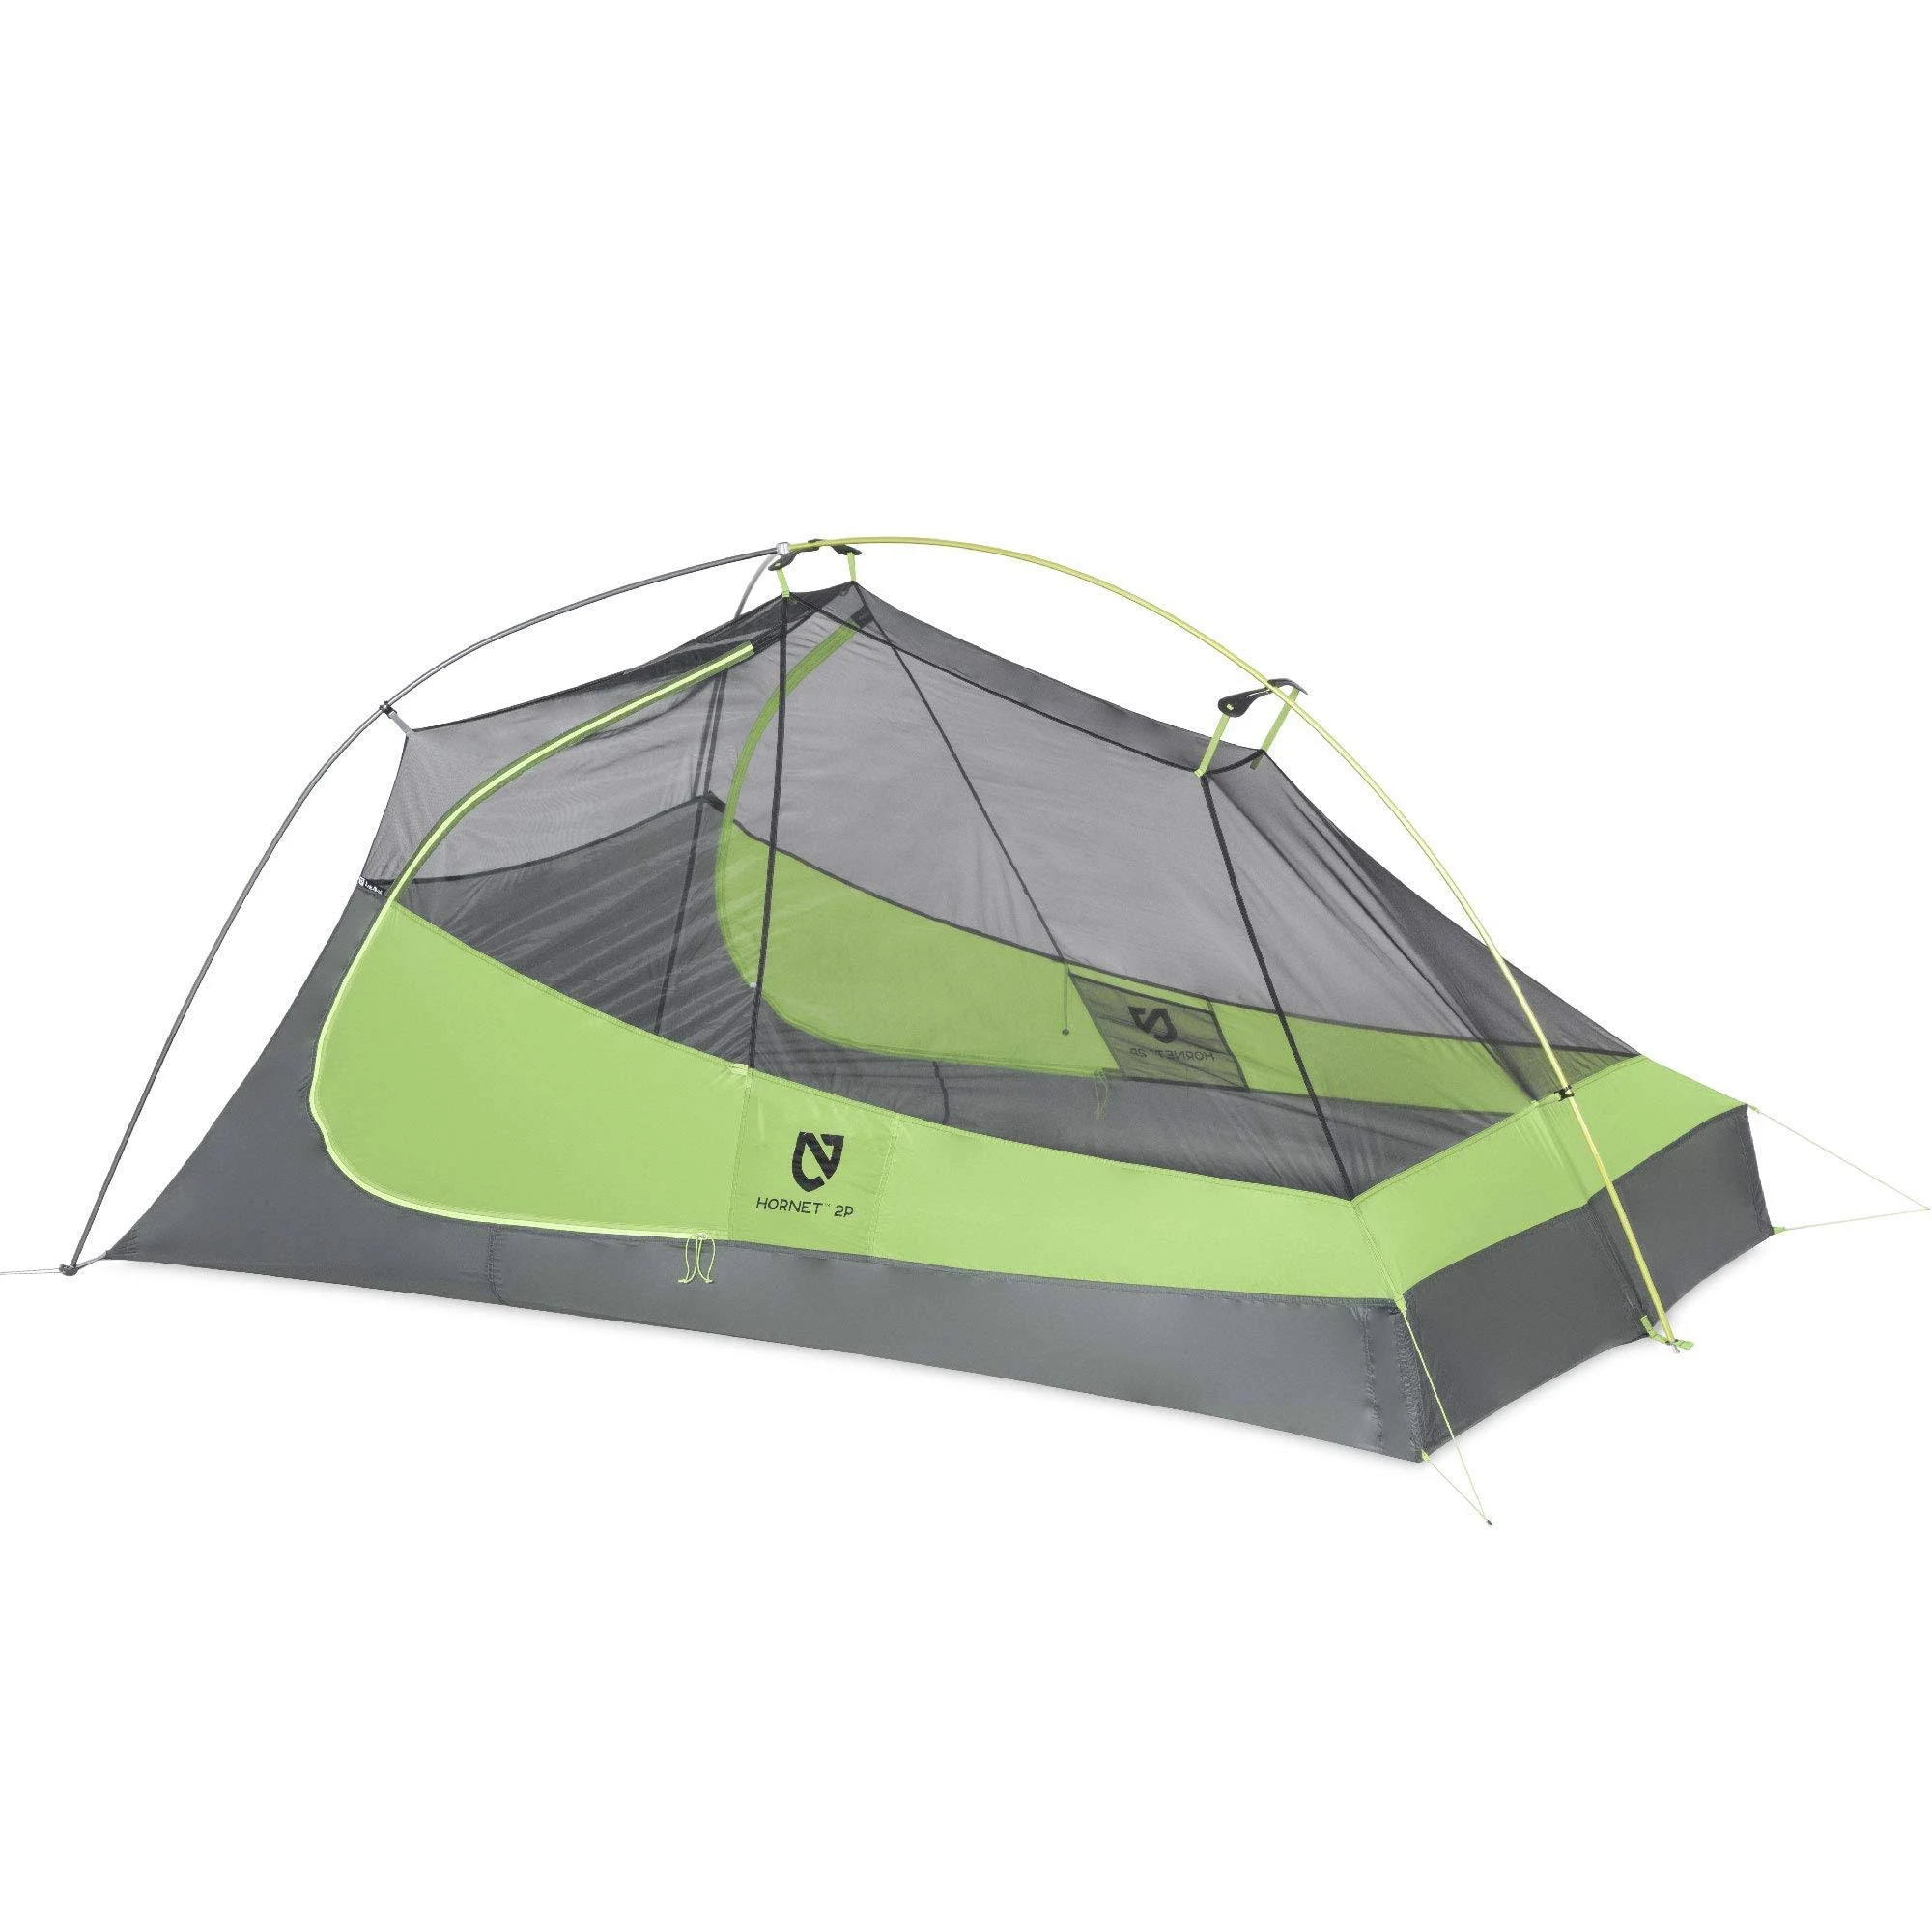 Nemo Hornet 2p Backpacking Tent-2 Person